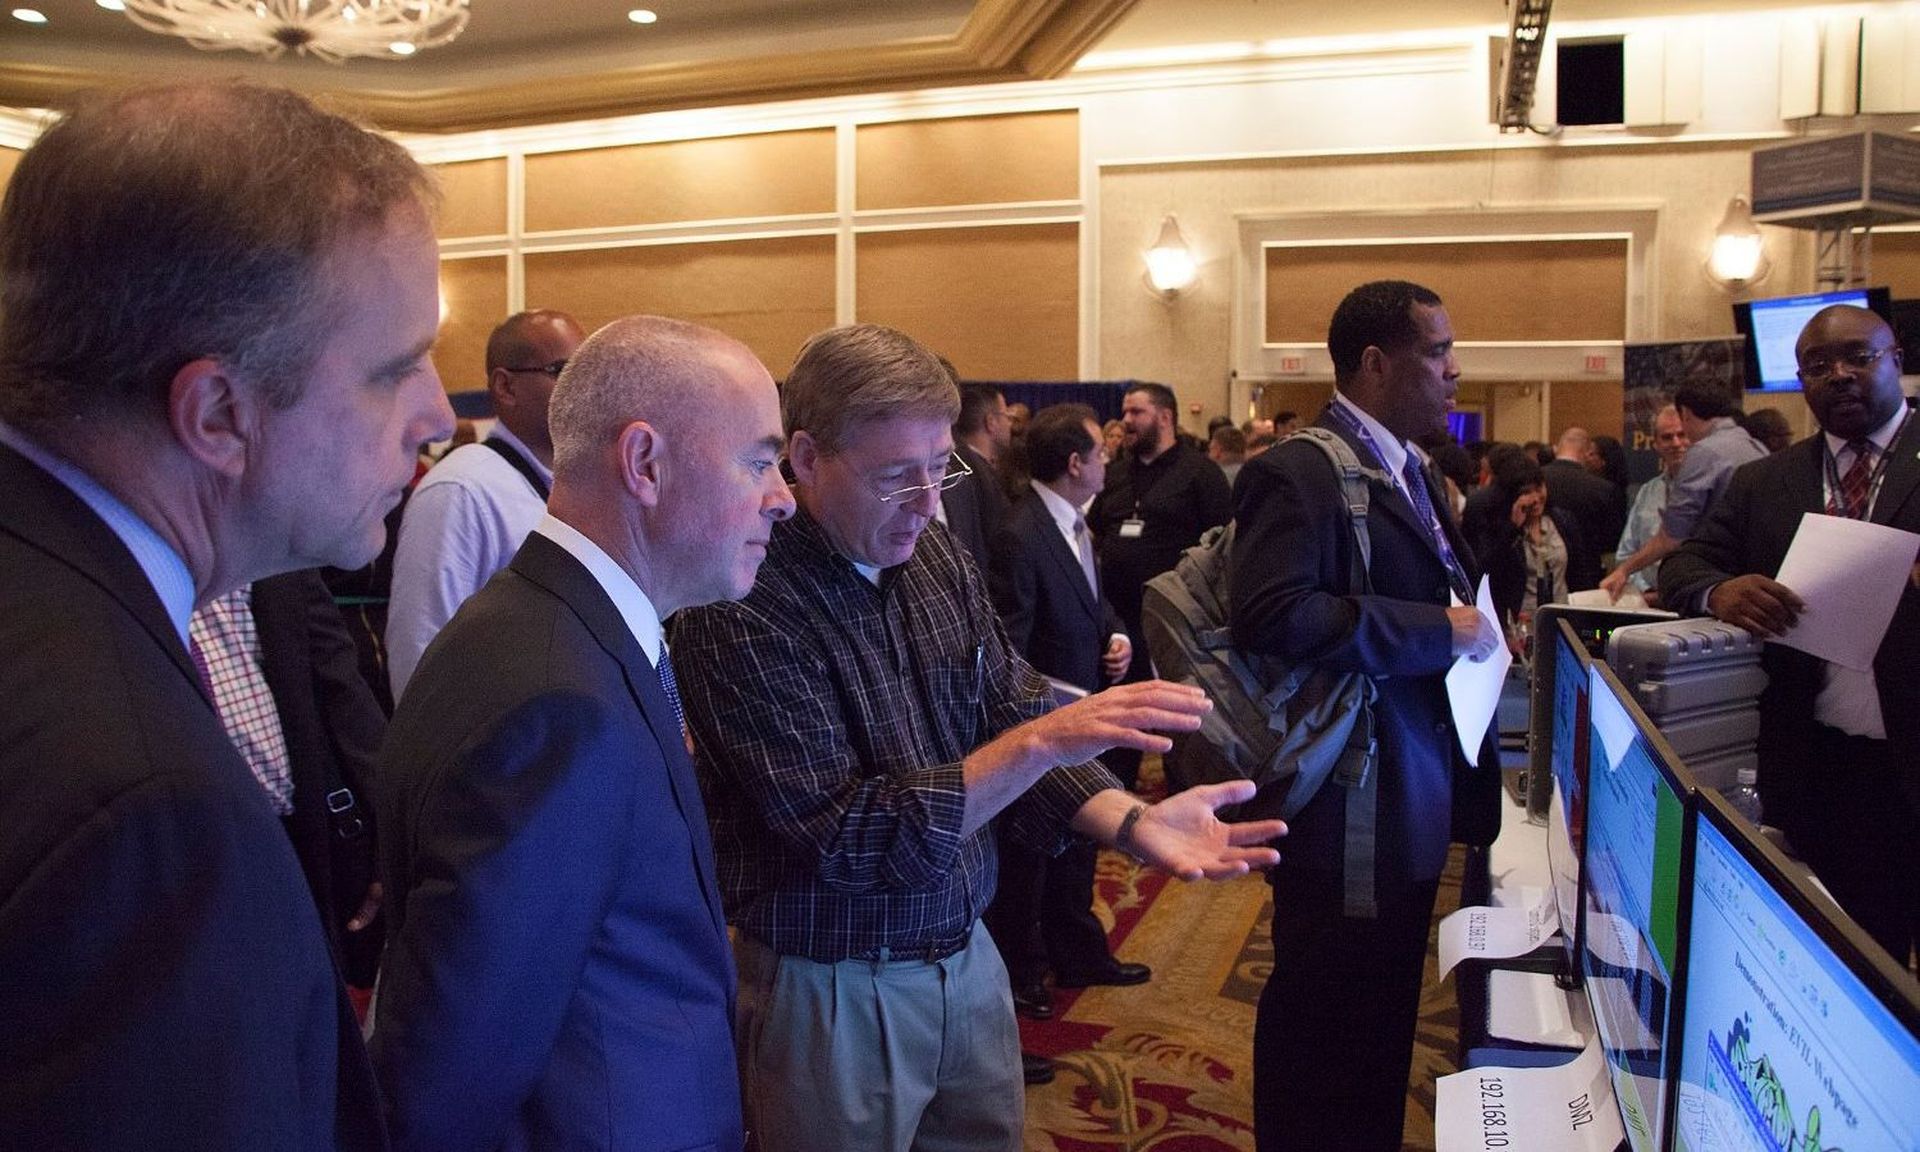 Government officials and job seekers meander a DHS Cyber and Tech Job Fair in 2016. (Ryan Henderson/DHS)